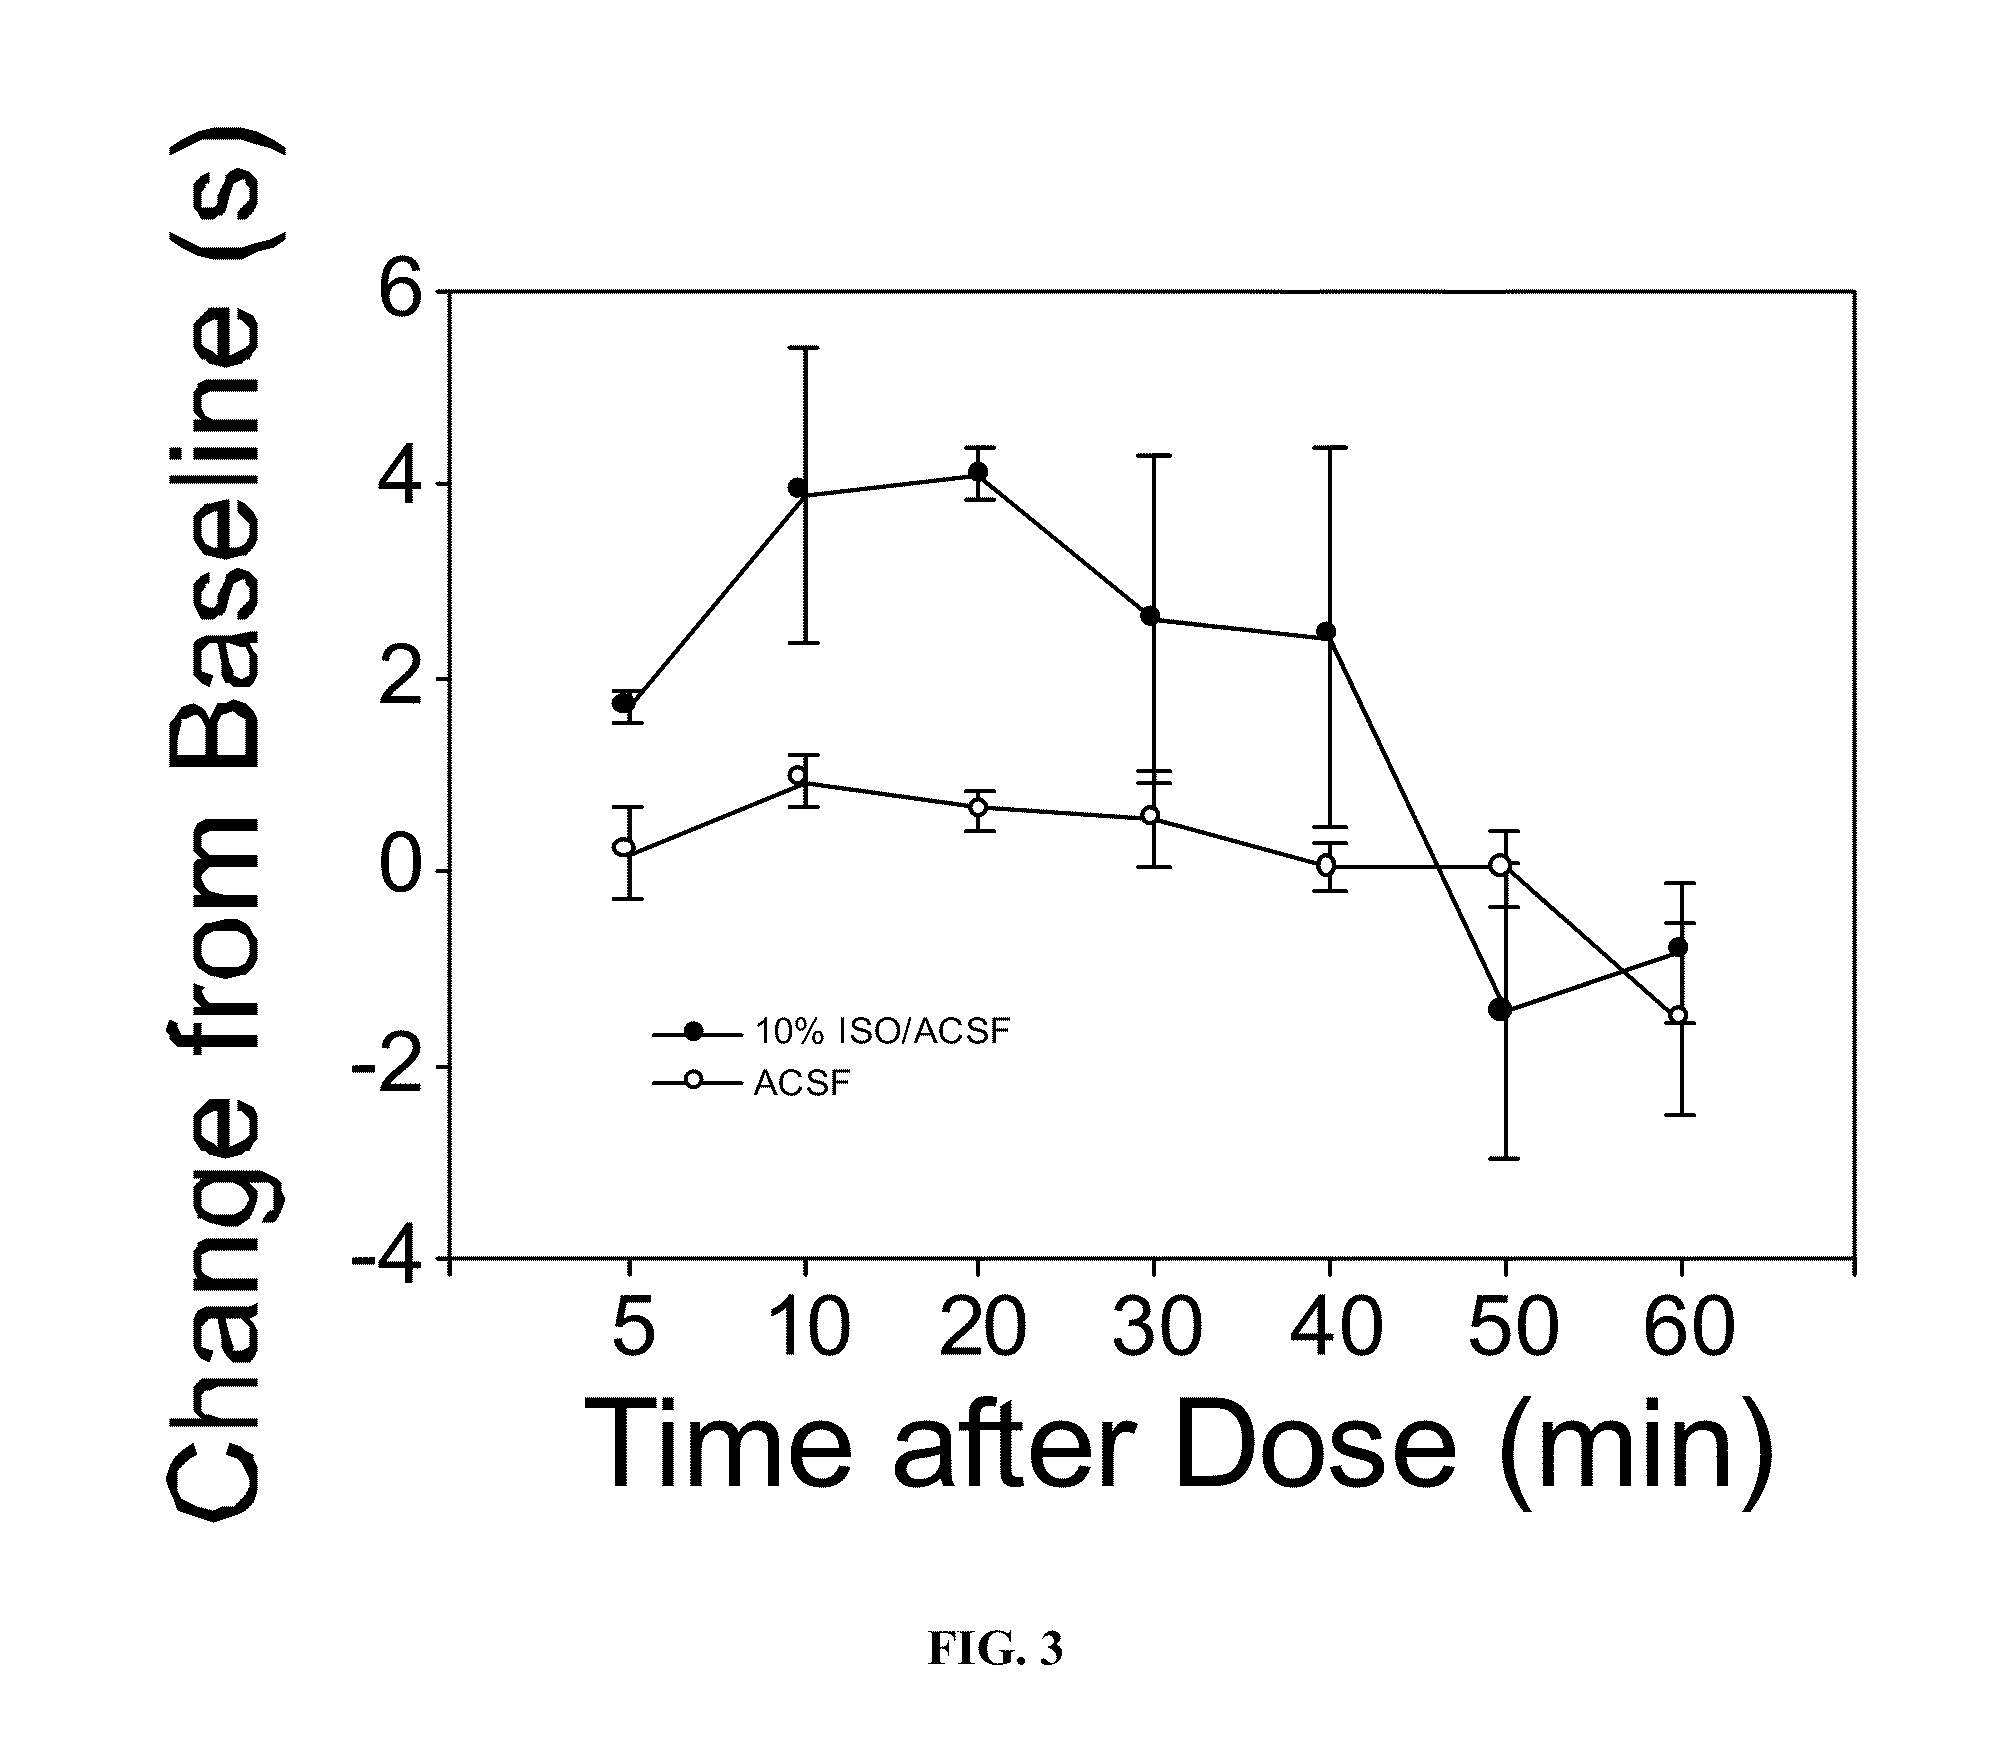 Methods for delivering volatile anesthetics for regional anesthesia and/or pain relief